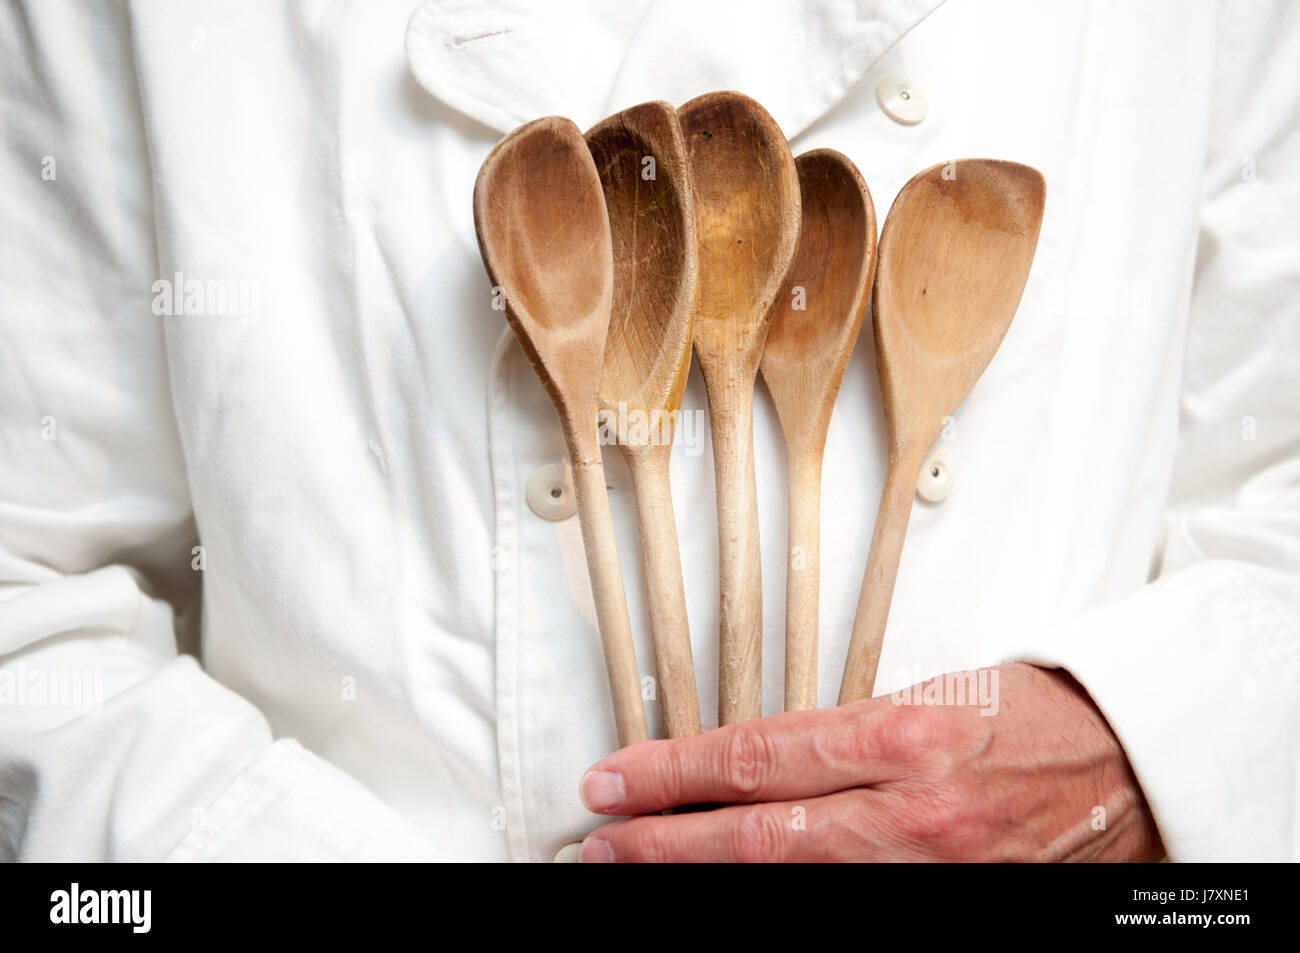 Chef holds cokking and kitchen utensils Stock Photo